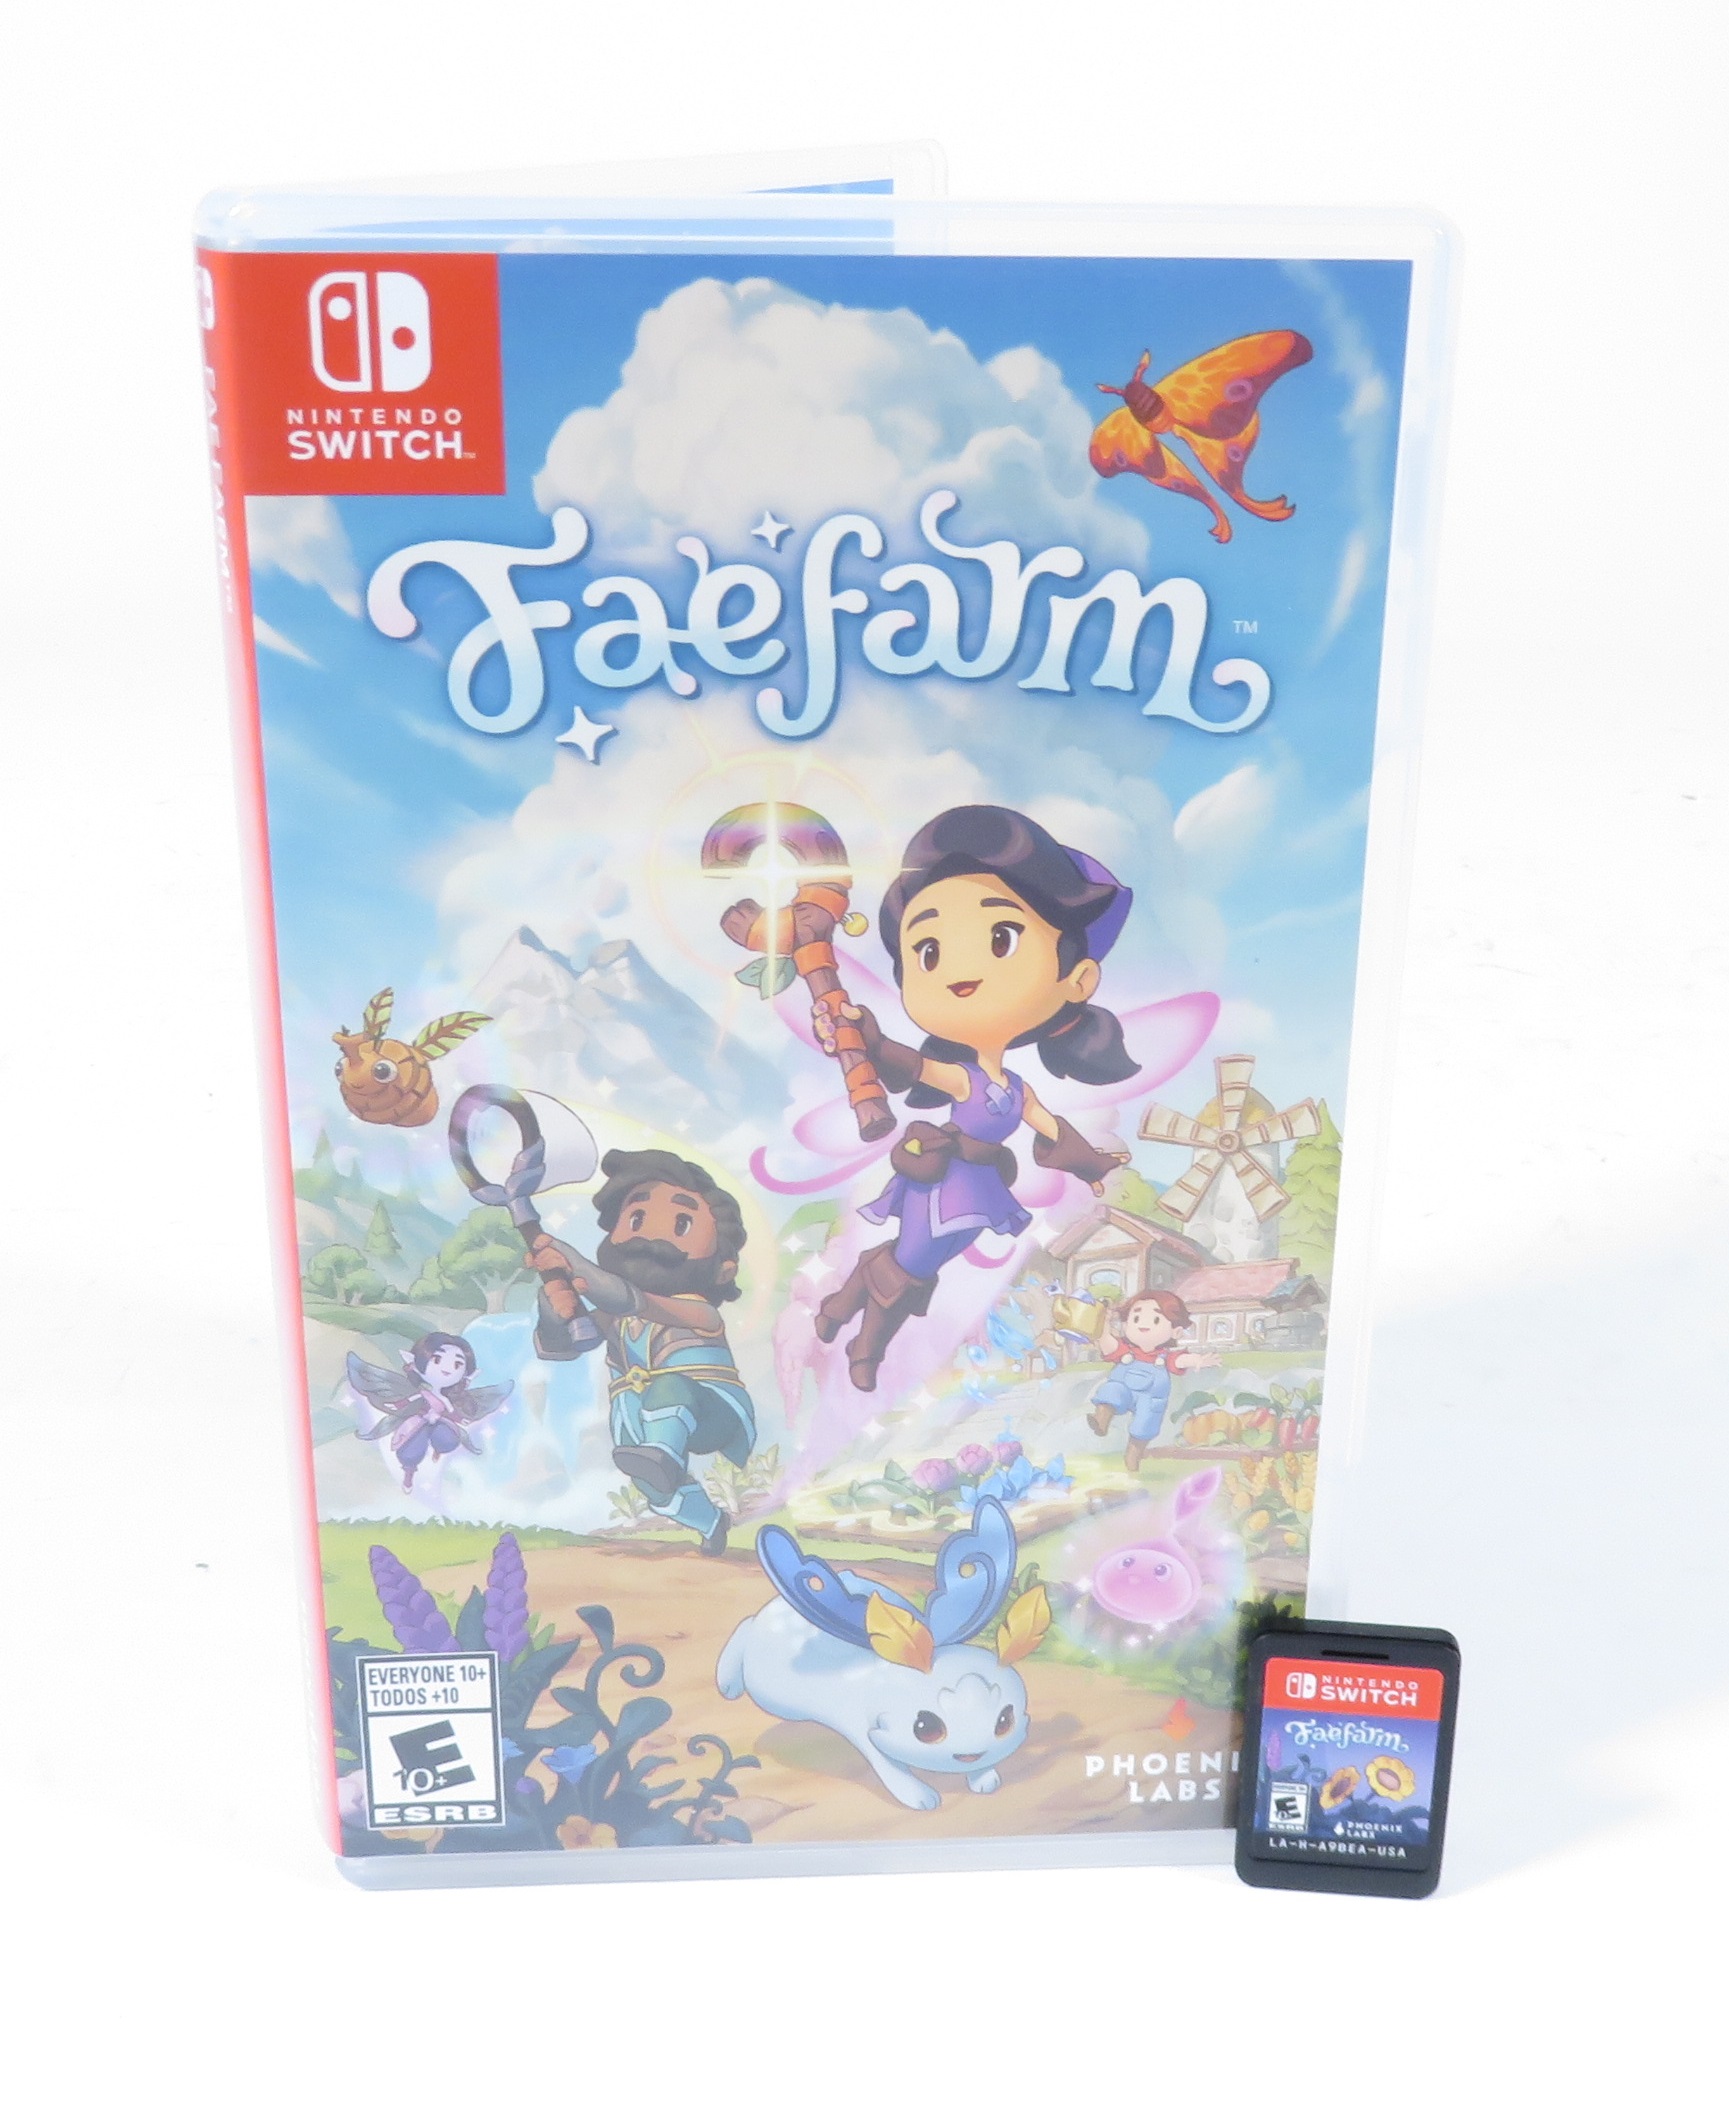 Video Farm the Nintendo for Game Fae Switch